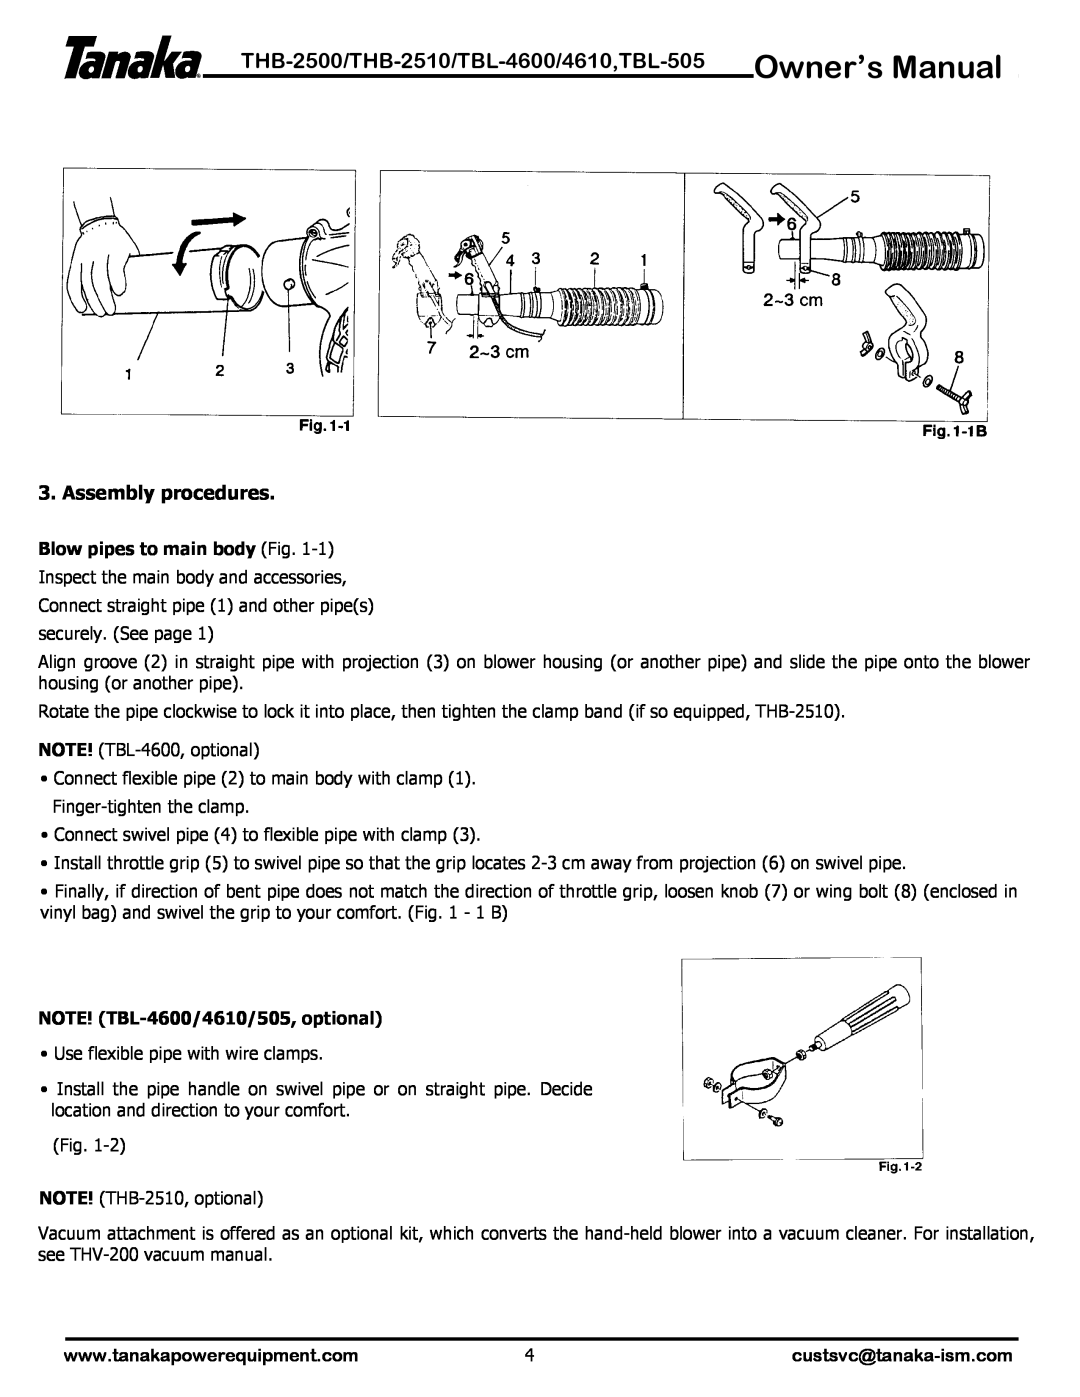 Tanaka THB-2510, THB-2500, TBL-505 manual Assembly procedures, Blow pipes to main body Fig, NOTE! TBL-4600/4610/505, optional 